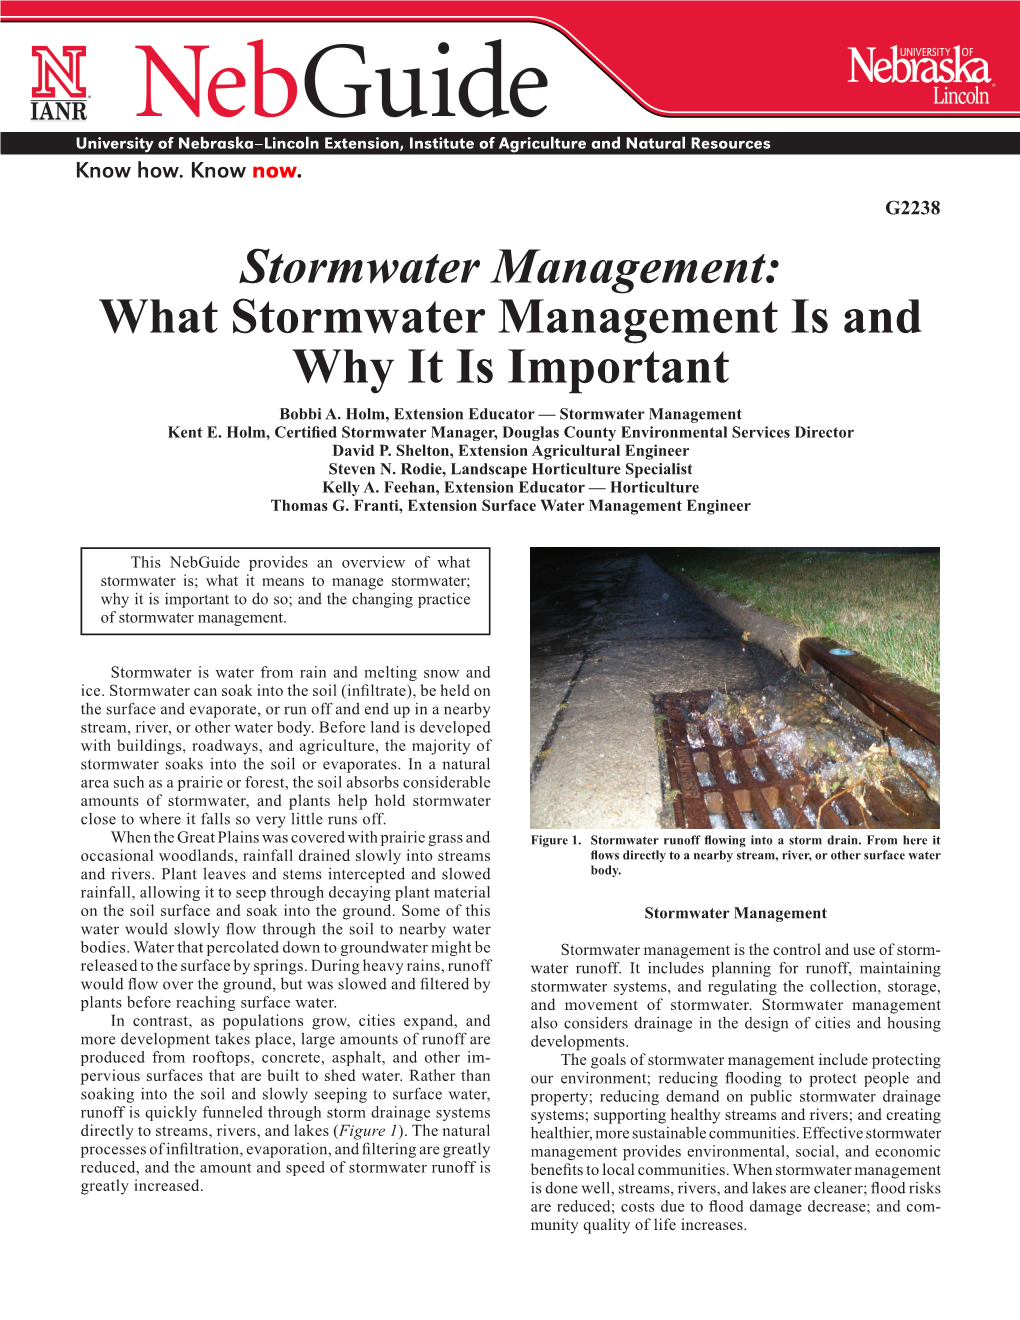 Stormwater Management: What Stormwater Management Is and Why It Is Important Bobbi A